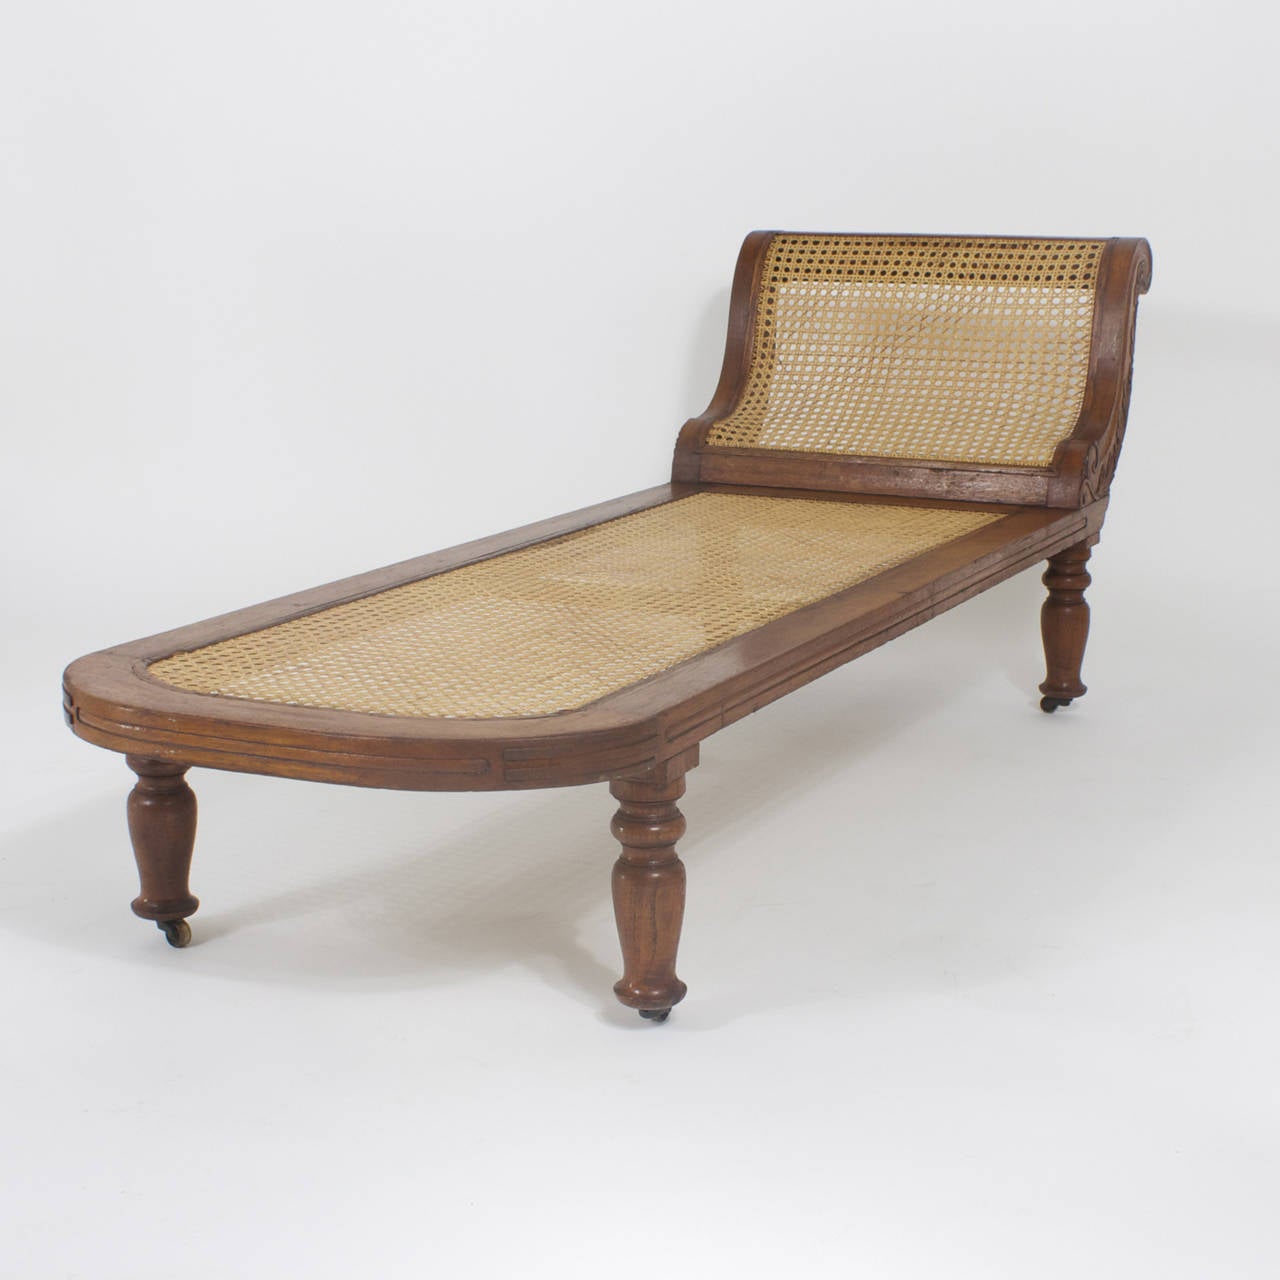 Antique West Indian chaise longue or recamier made from mahogany. Featuring caned seat and back, expertly carved back scrolling and turned legs with an unusual bell shape. Handmade construction and an over all elegant form. Another addition to our